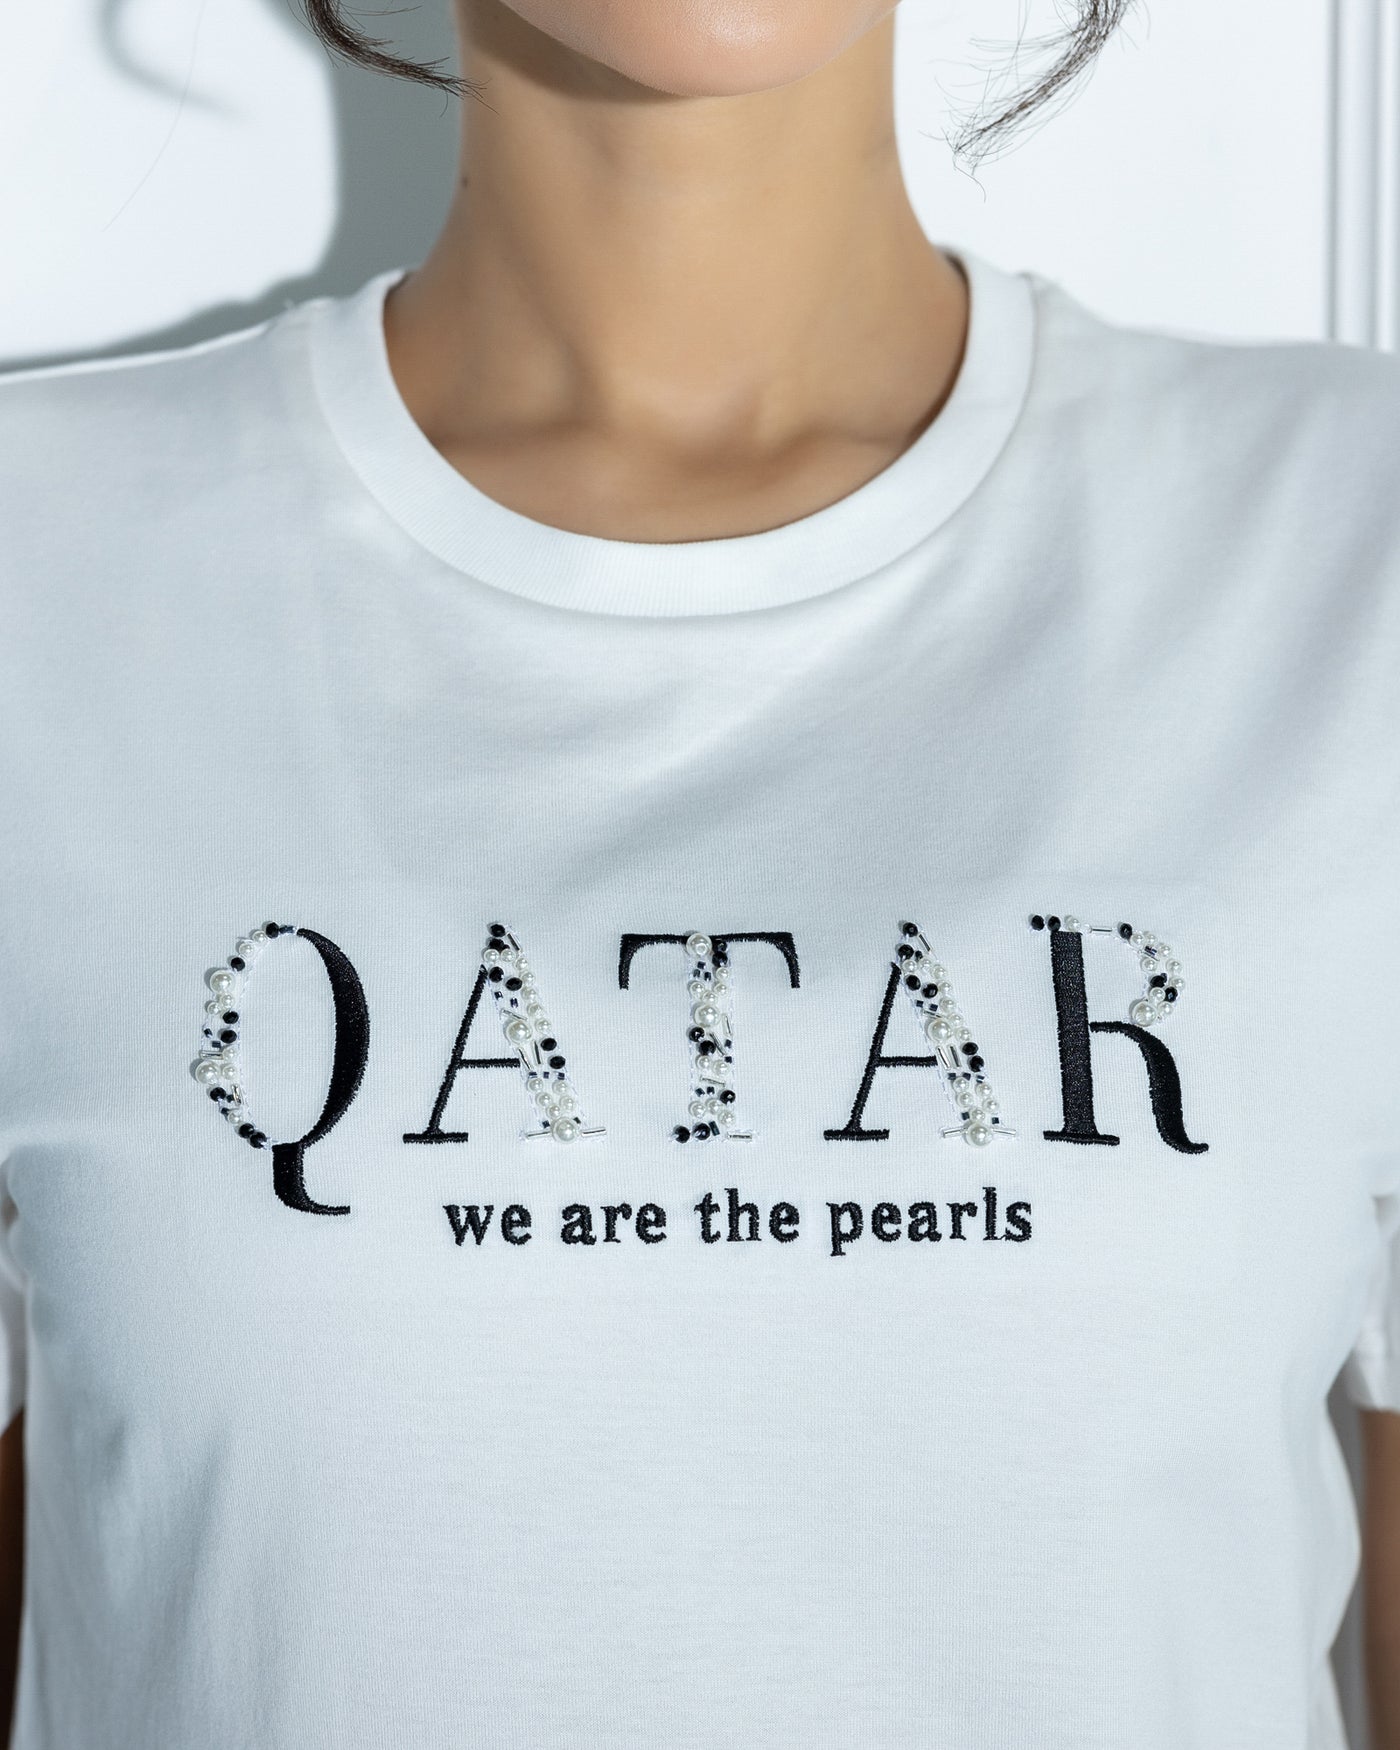 Qatar we are the pearls